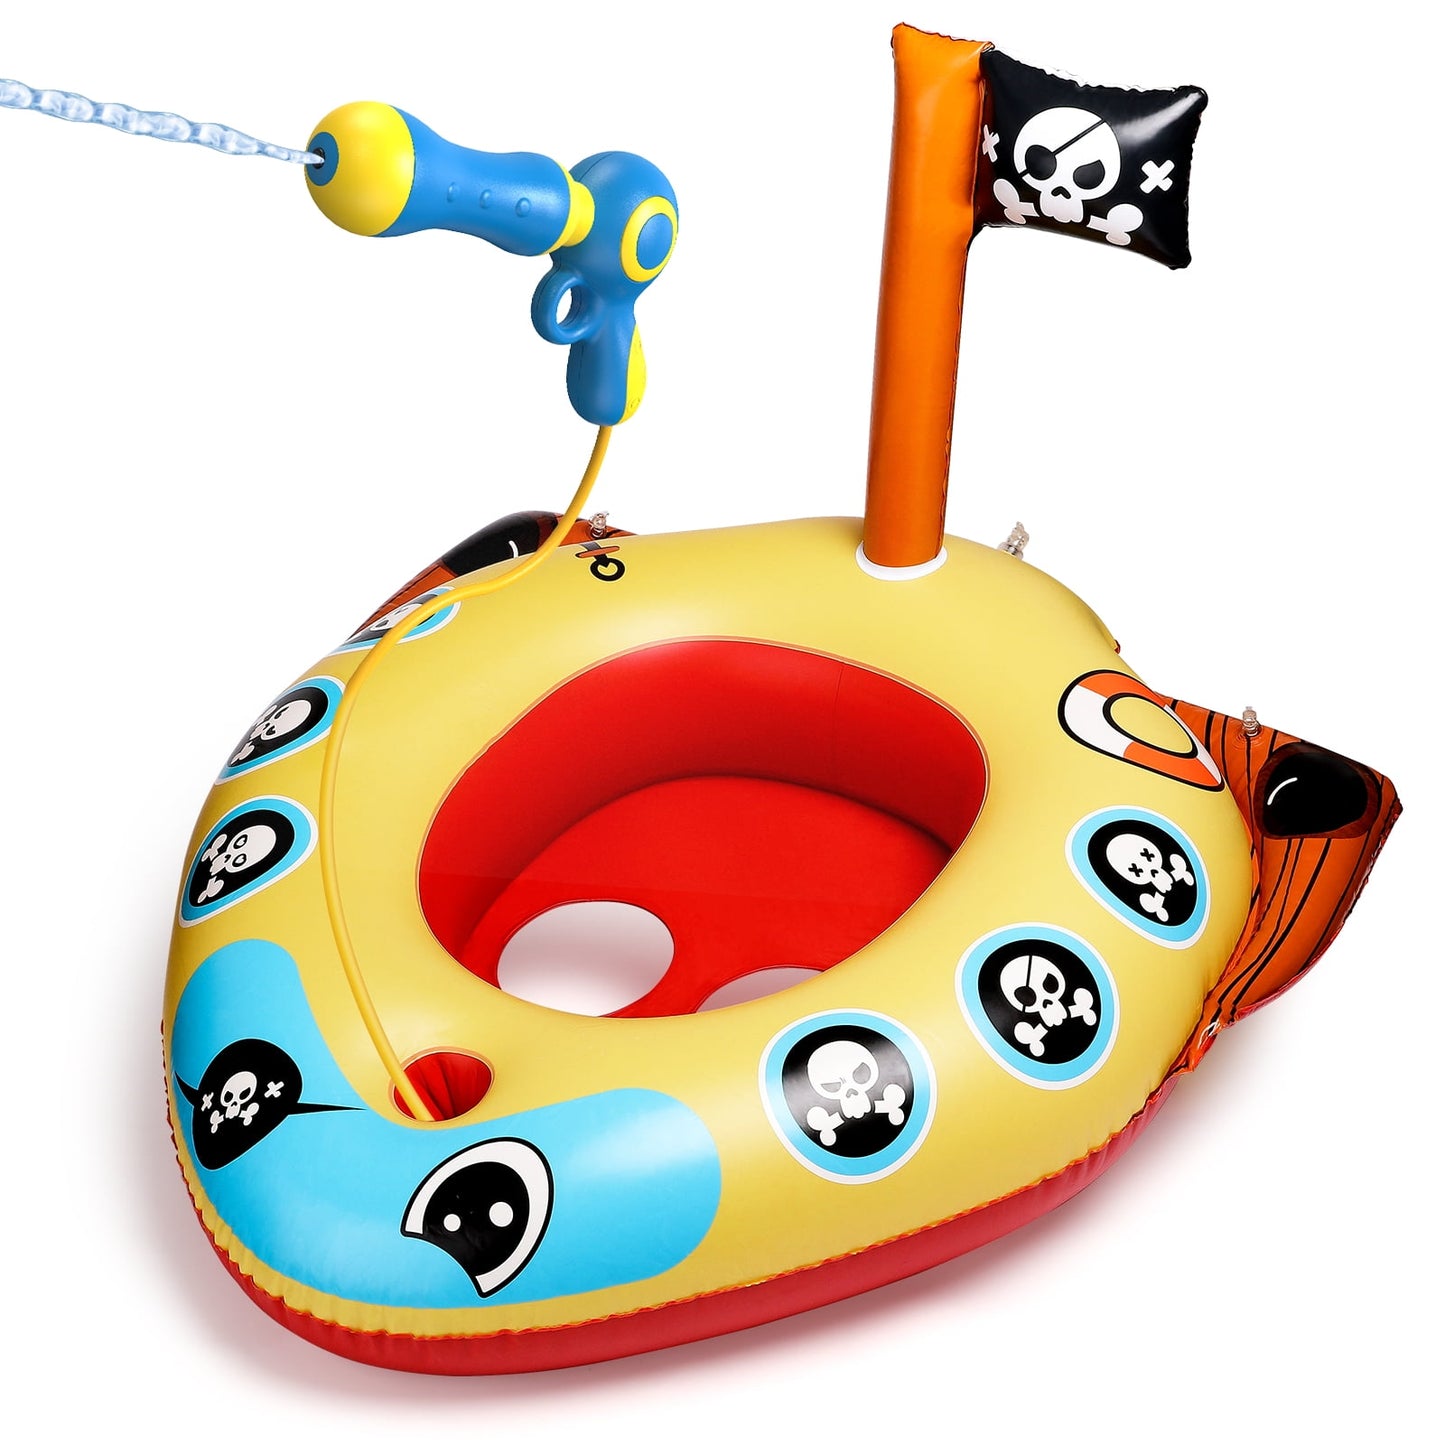 Swimming Ring Pool Floats for Kids with Squirt Gun, Inflatable Ride-on Pirate Boat, Summer Toys Water Floaties for Toddler Boys Girls Aged 3+